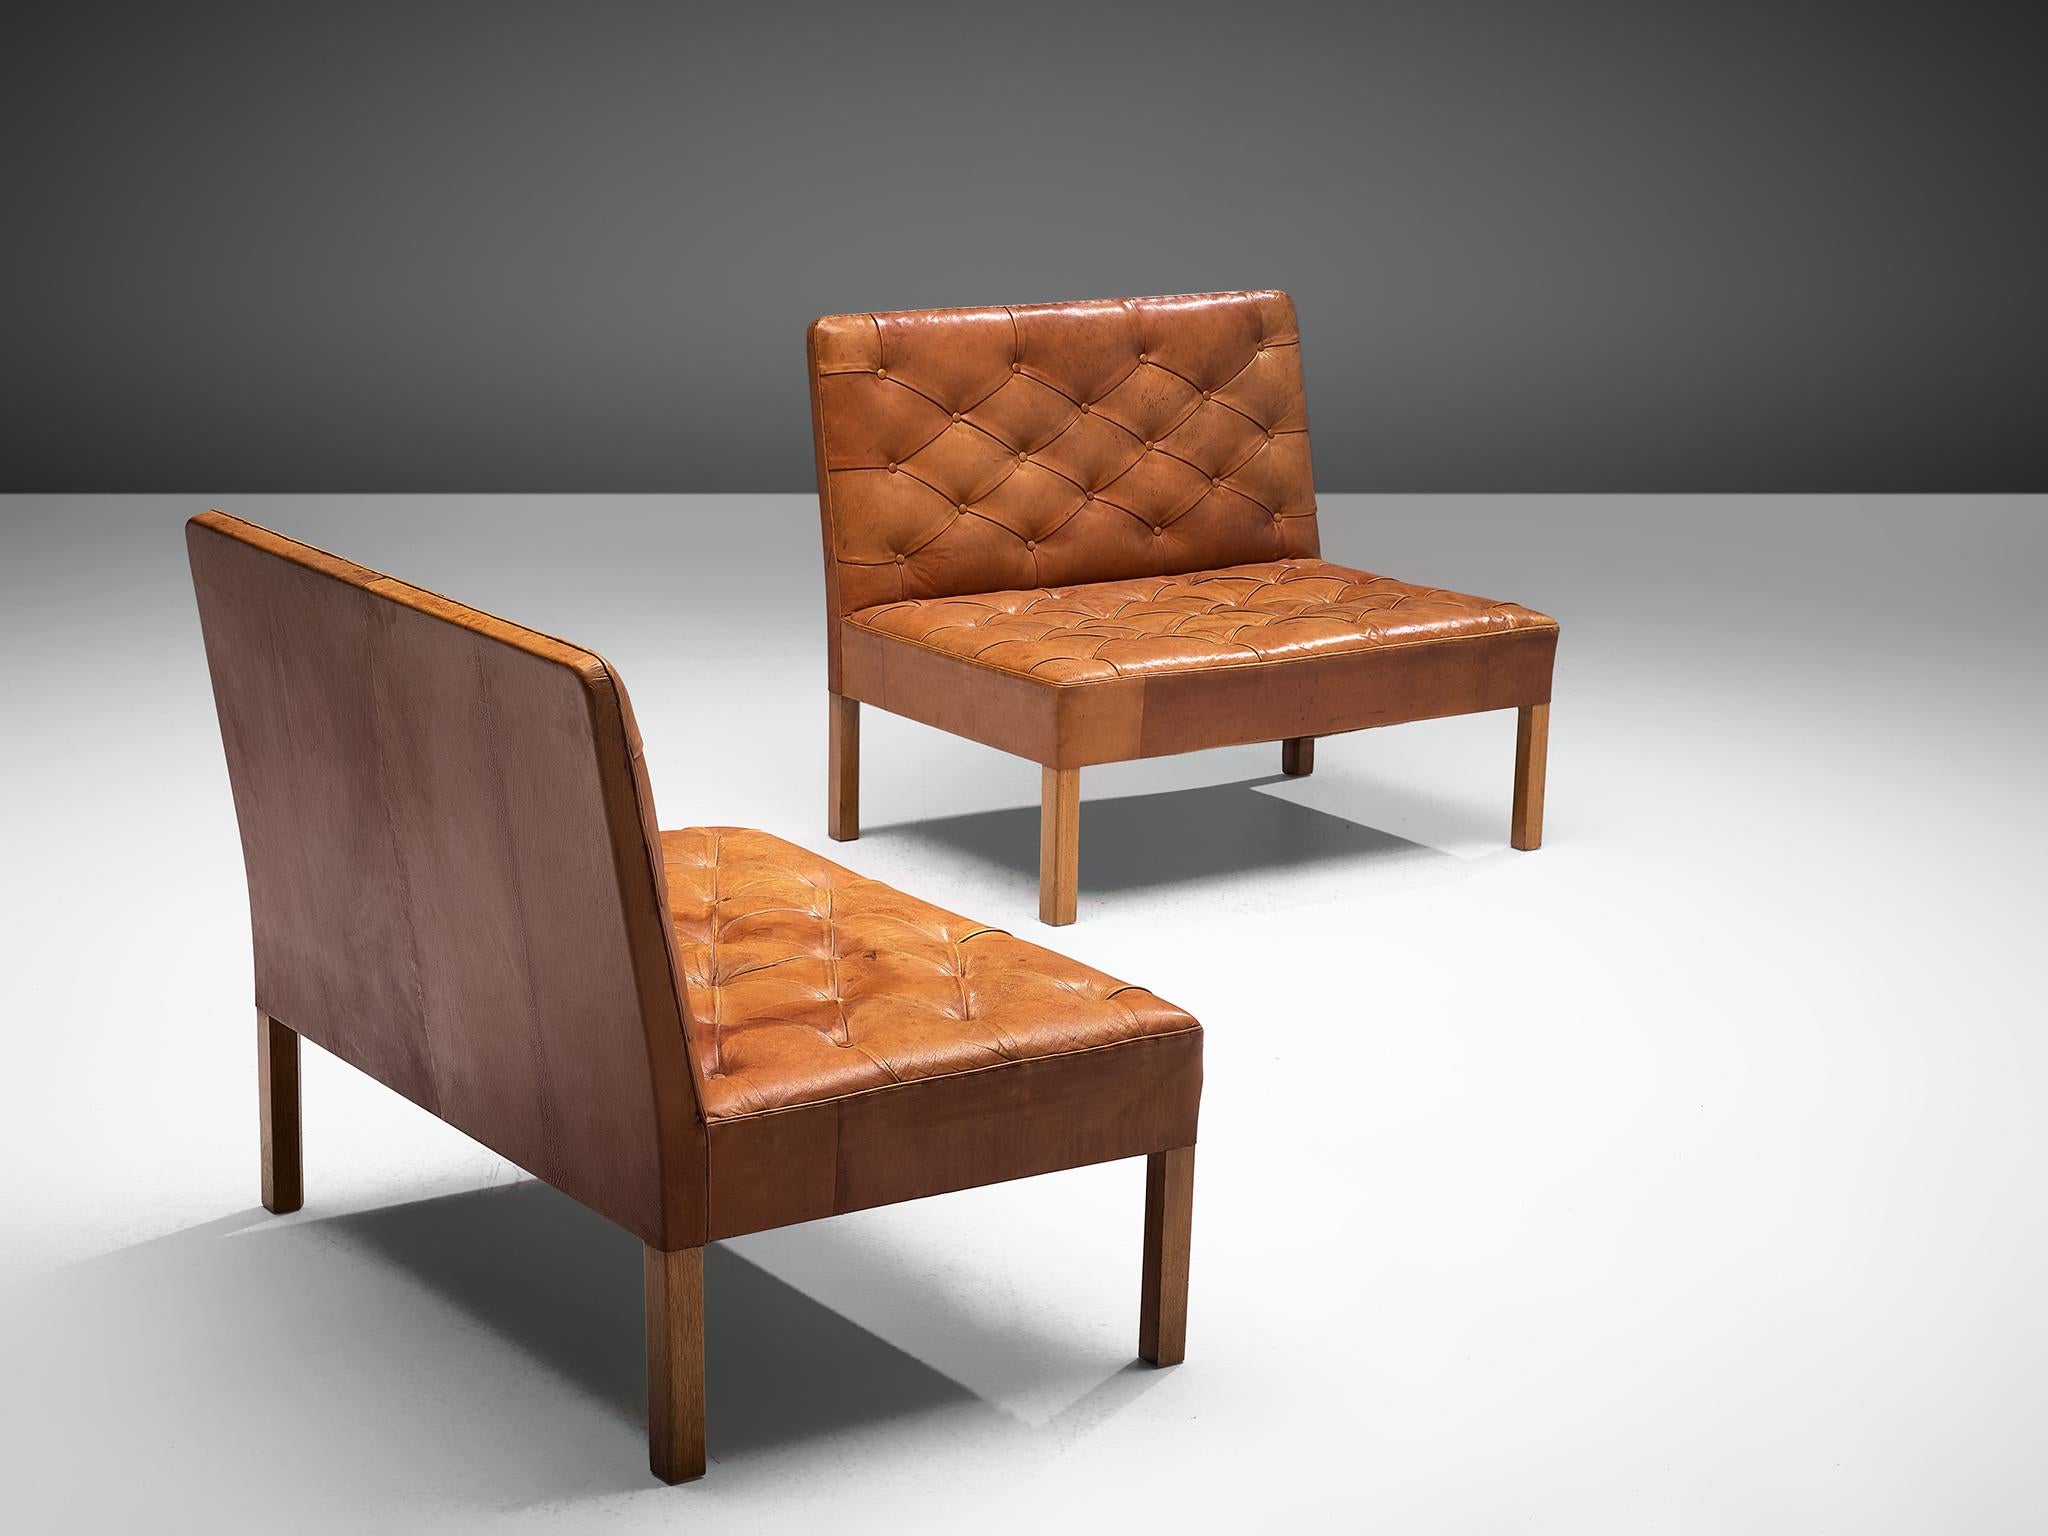 Kaare Klint for Rud Rasmussen, set of two settees model 4698, warm cognac leather and oak, Denmark, 1933, production 1970s. 

This set of freestanding sofas is one of the most iconic designs by Kaare Klint. They show a mix of functional,